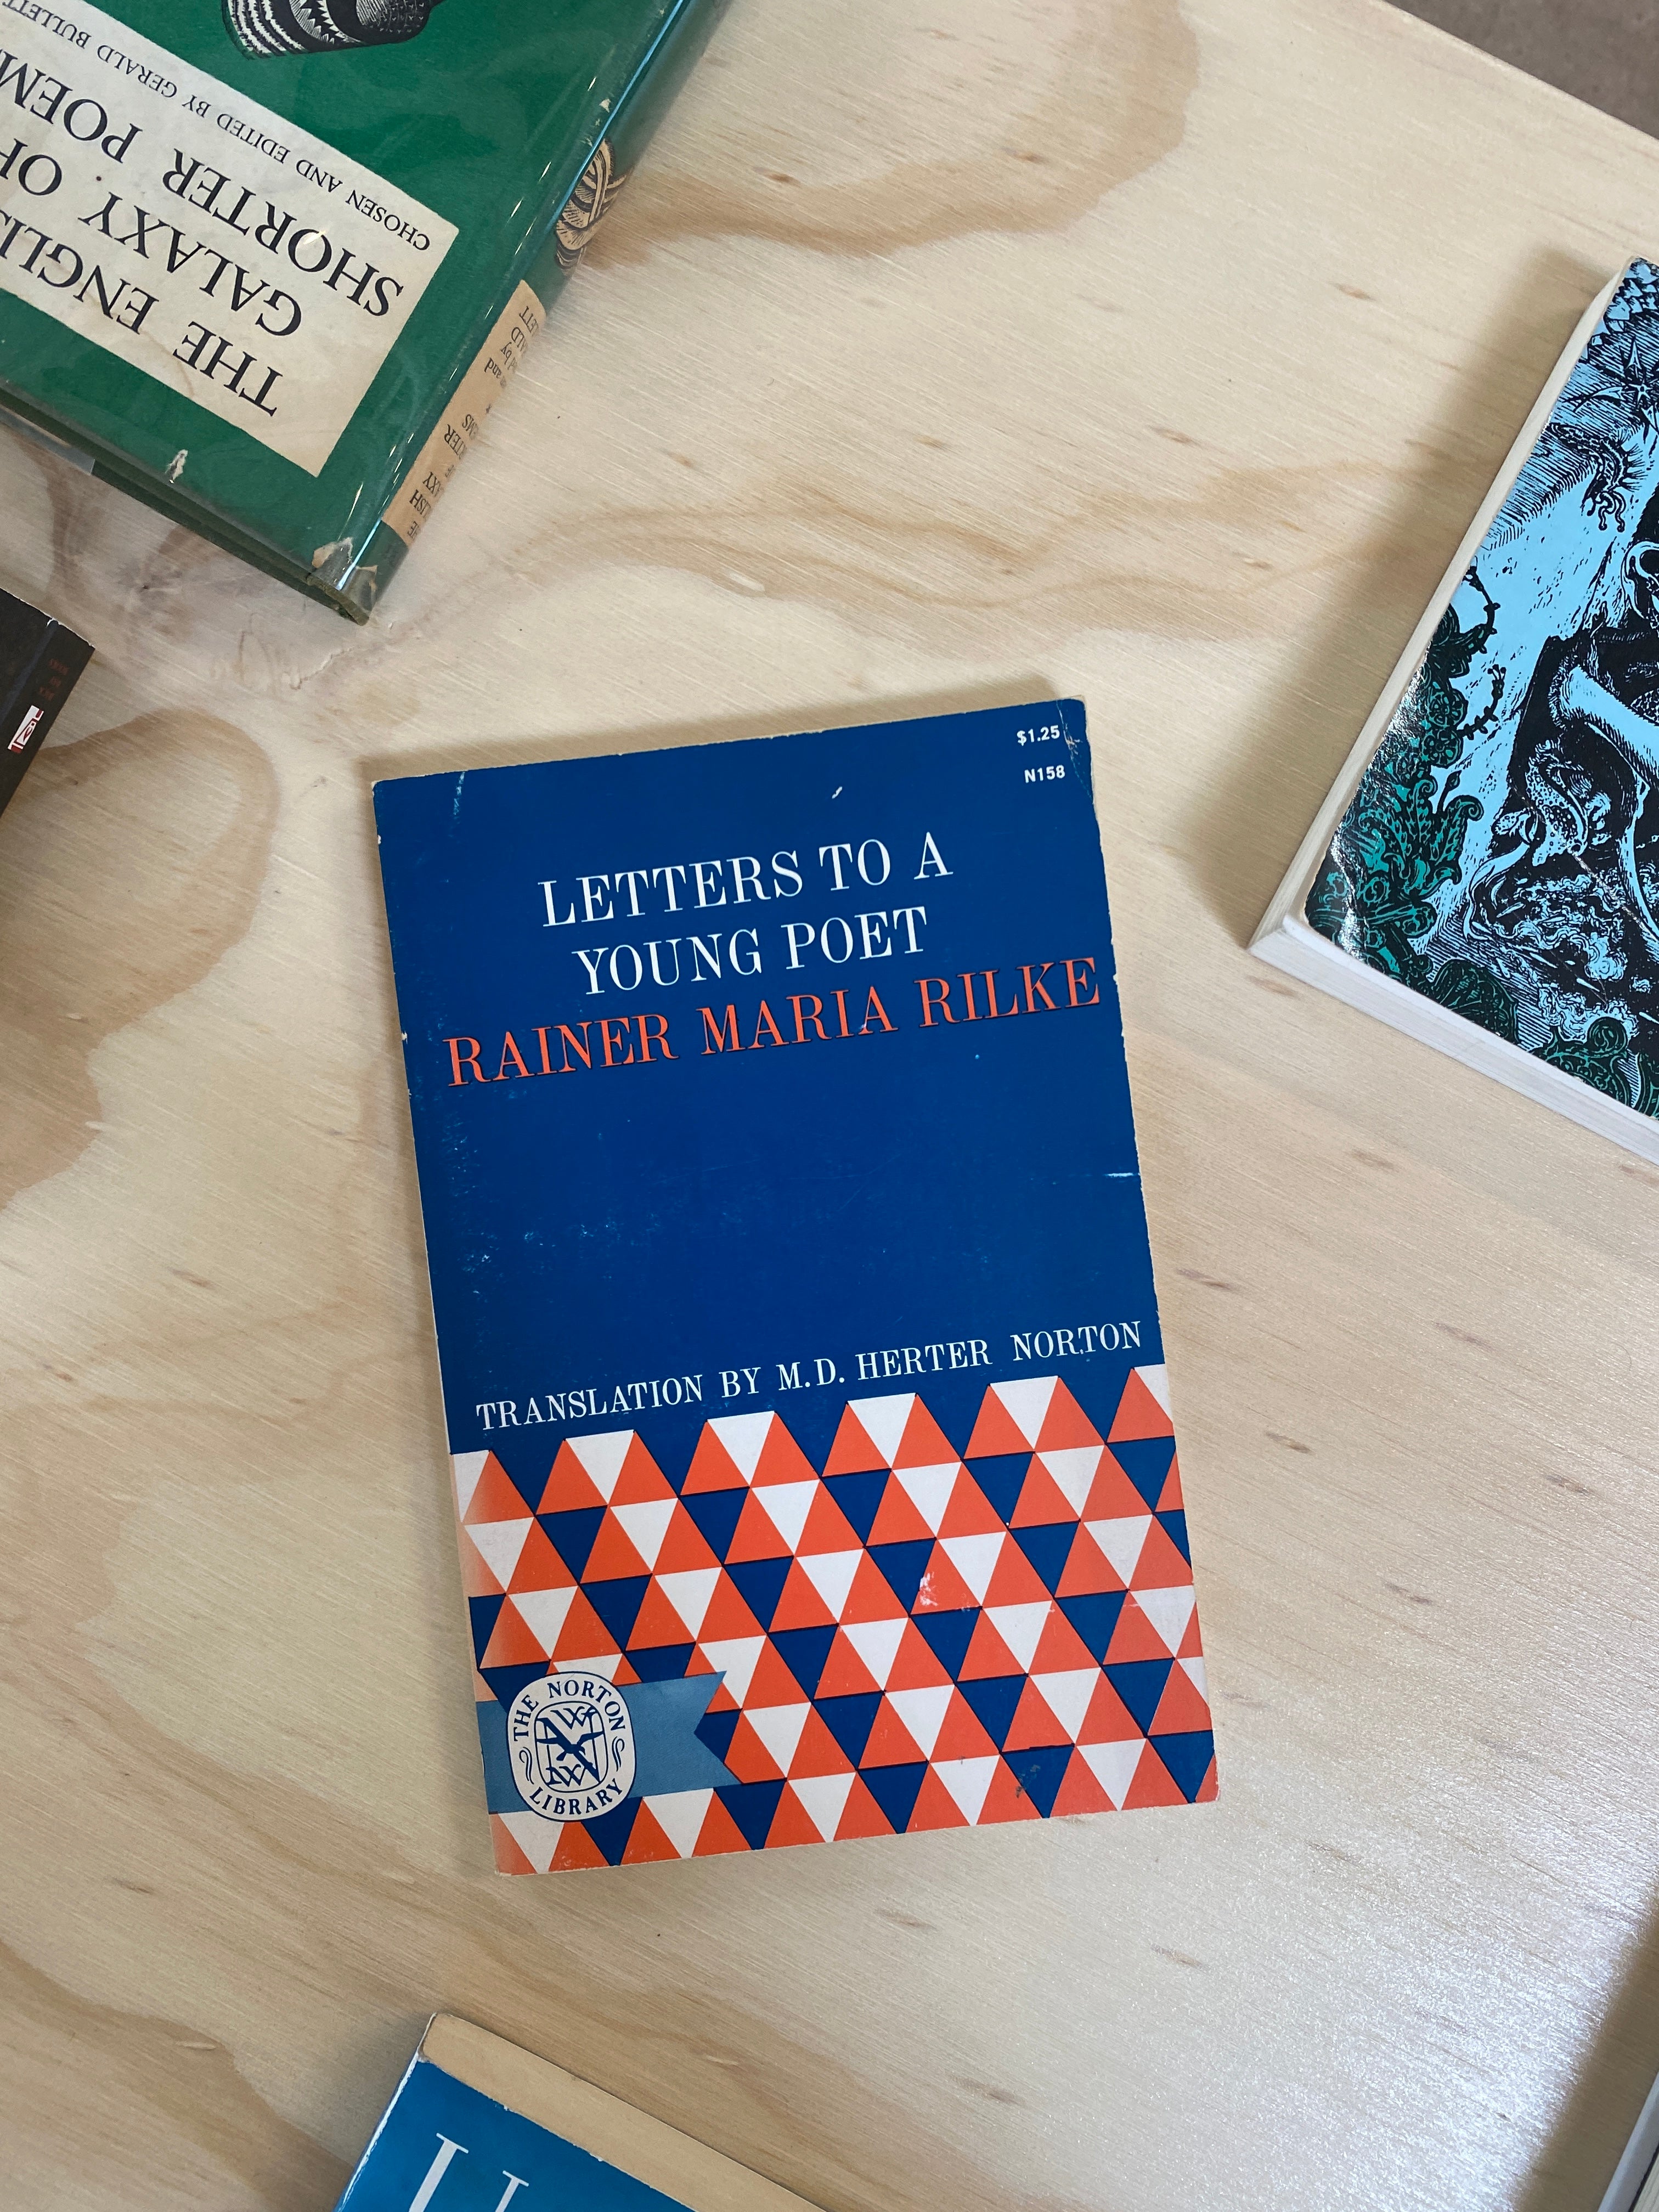 Letters to a Young Poet by Rainer Maria Rilke (Norton Trade)